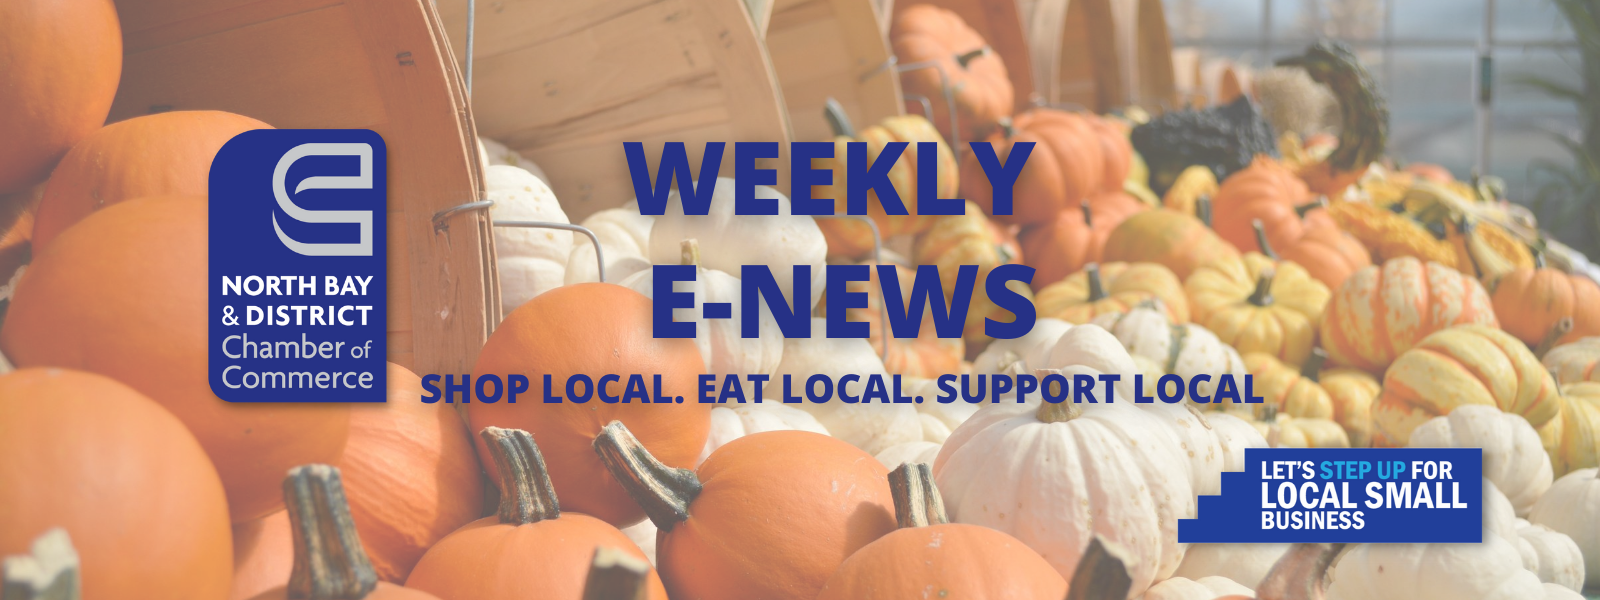 Weekly E-News Pumpking Images